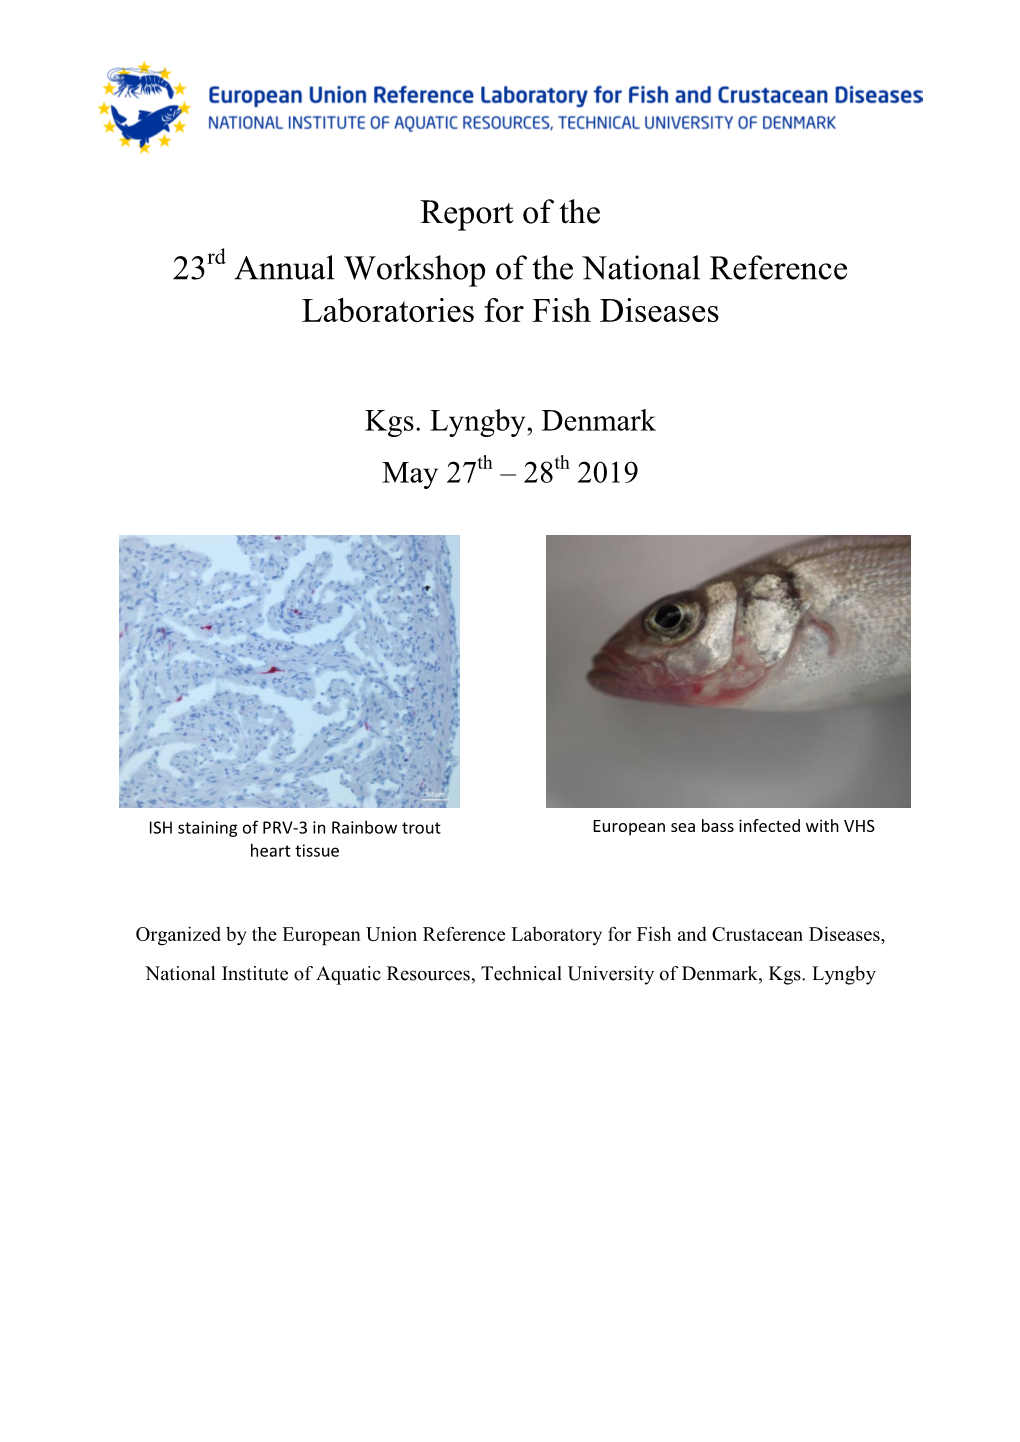 Report of the 23 Annual Workshop of the National Reference